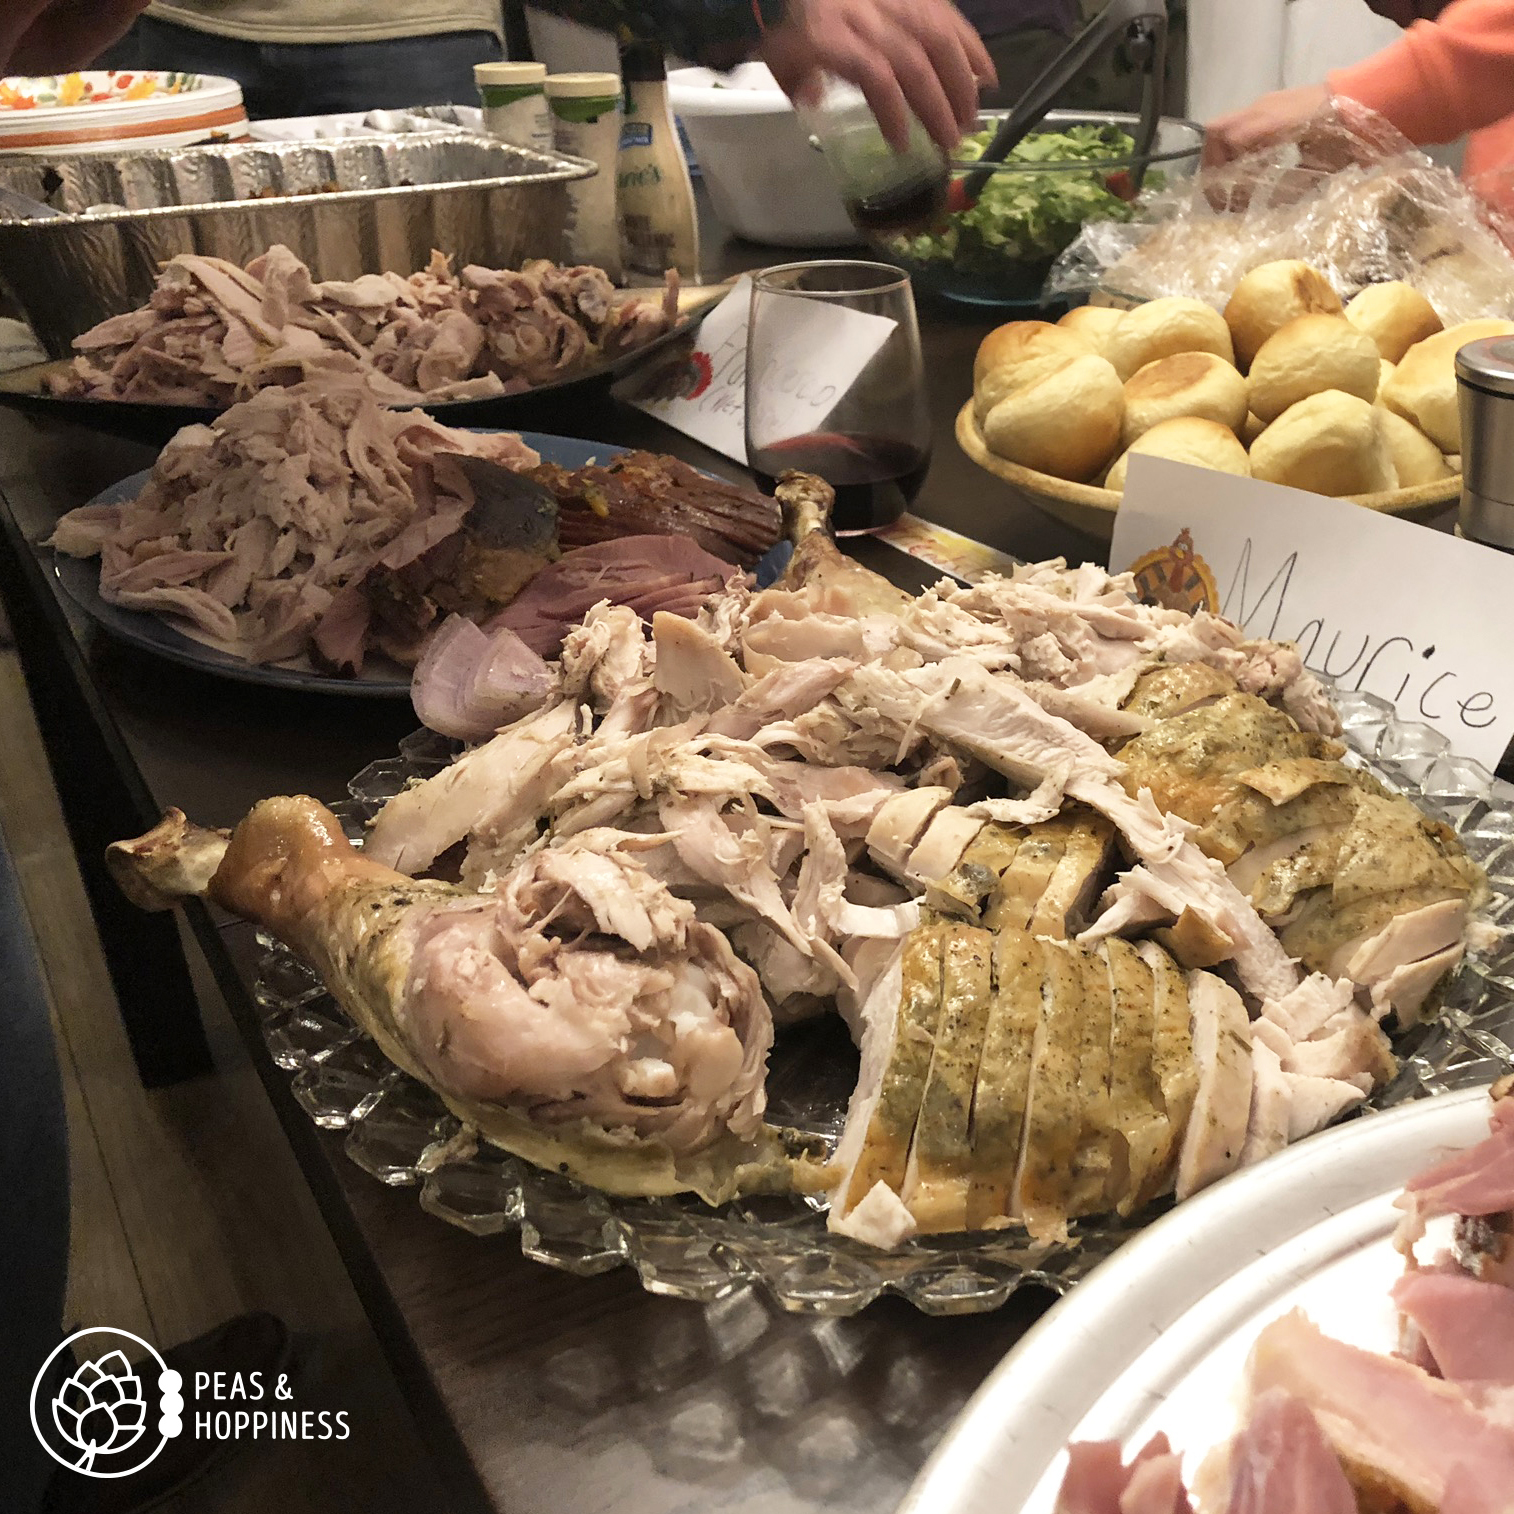 Table of food at Thanksgiving - Turkey, rolls, and more